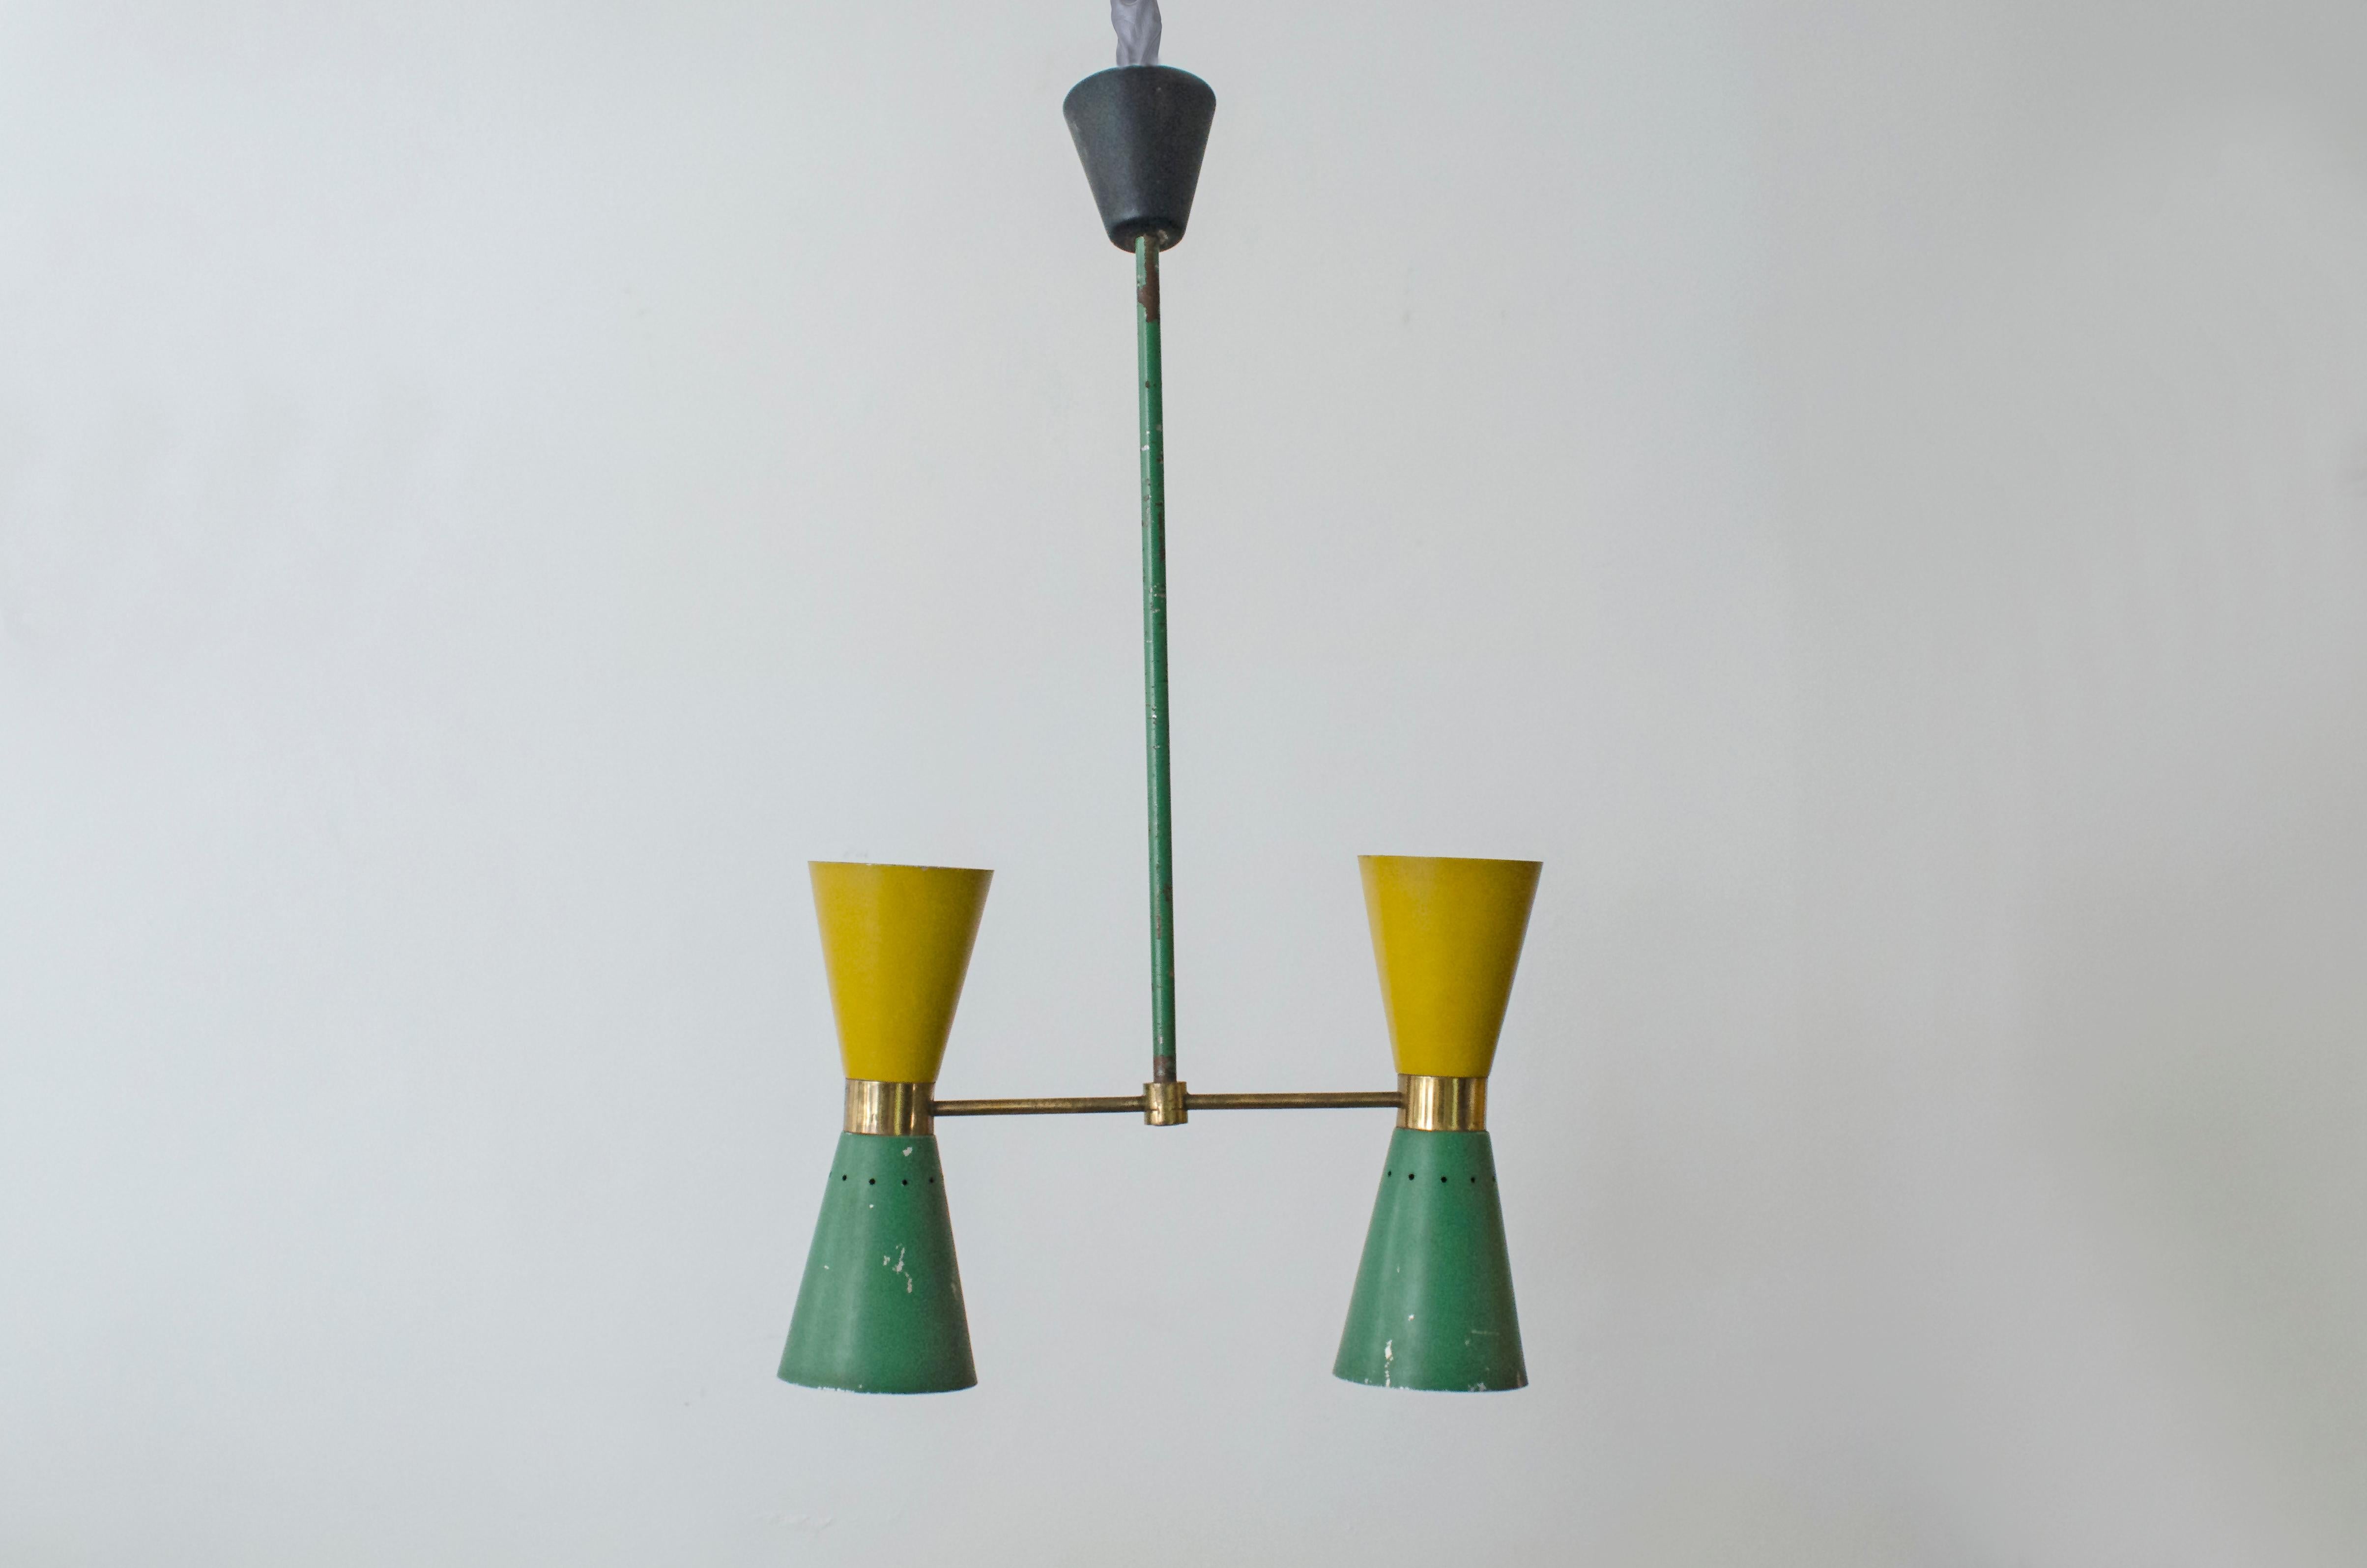 Pendant made of iron and bronze, painted green and yellow, by the Stilnovo house.

Stilnovo was a company founded by Bruno Gatta in 1946. Stilnovo is an important part of the first wave of post-World War II Italian design companies specializing in